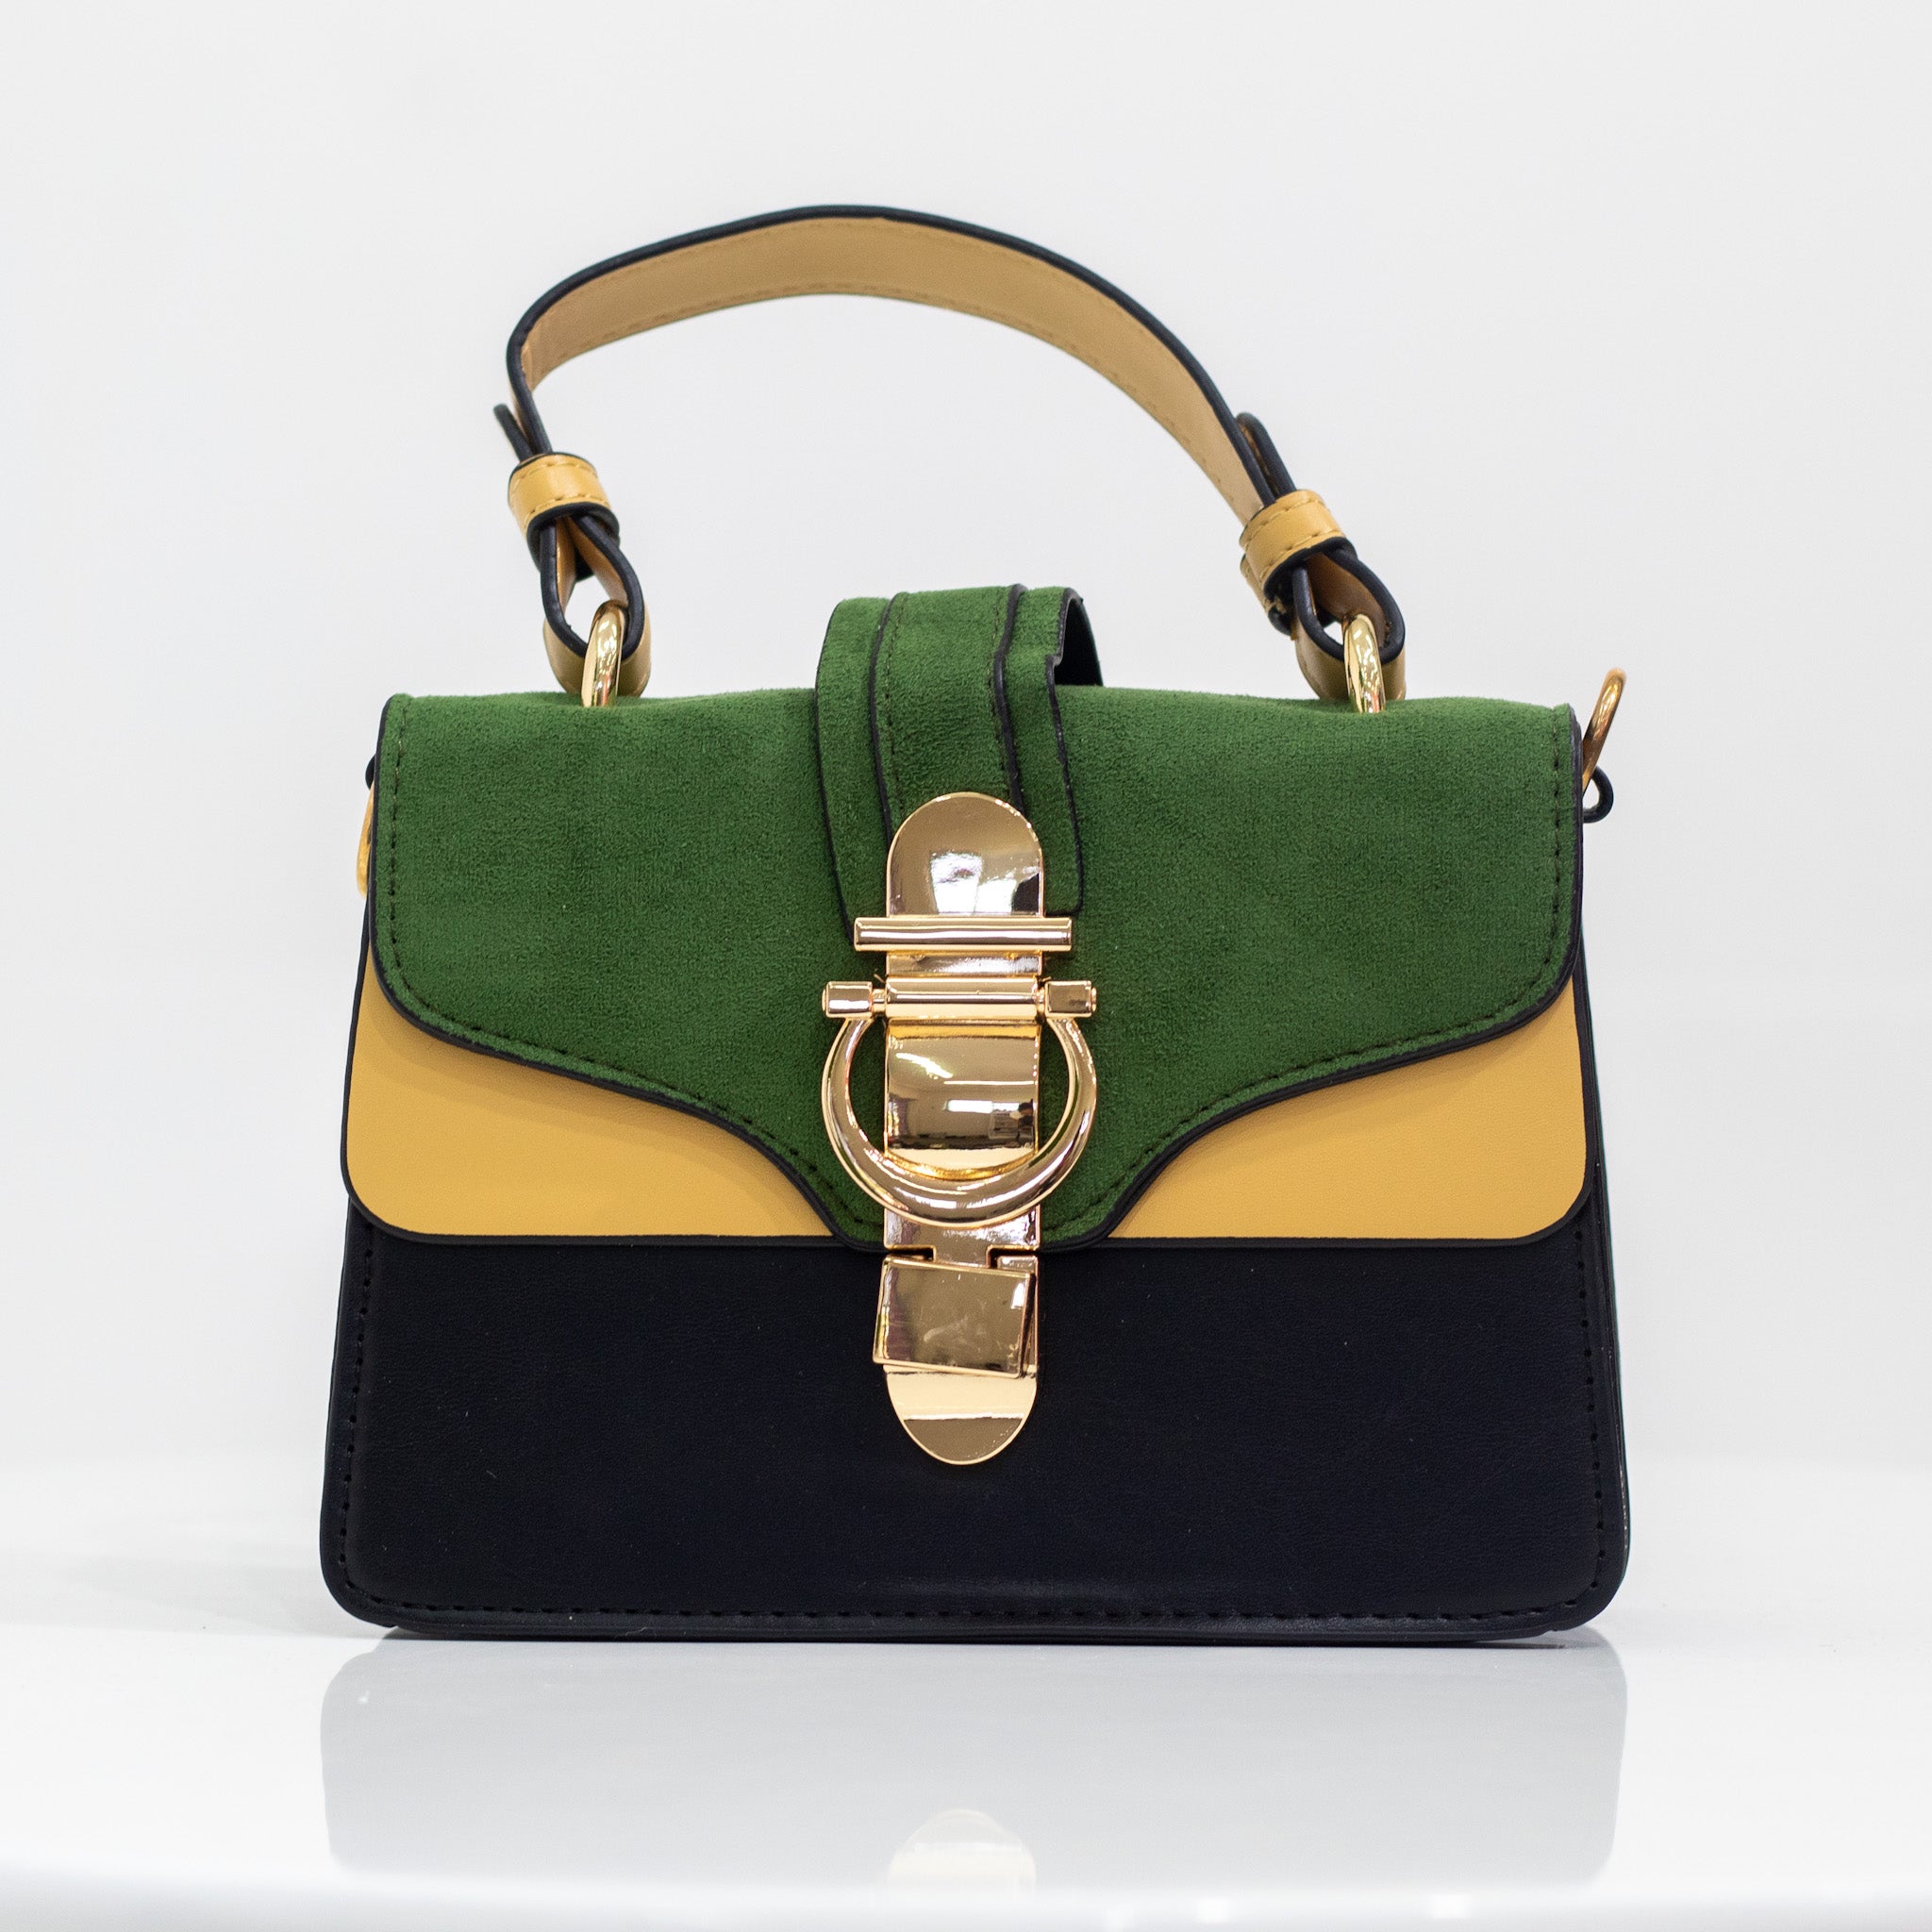 Yasti multi-color faux leather hand bag green